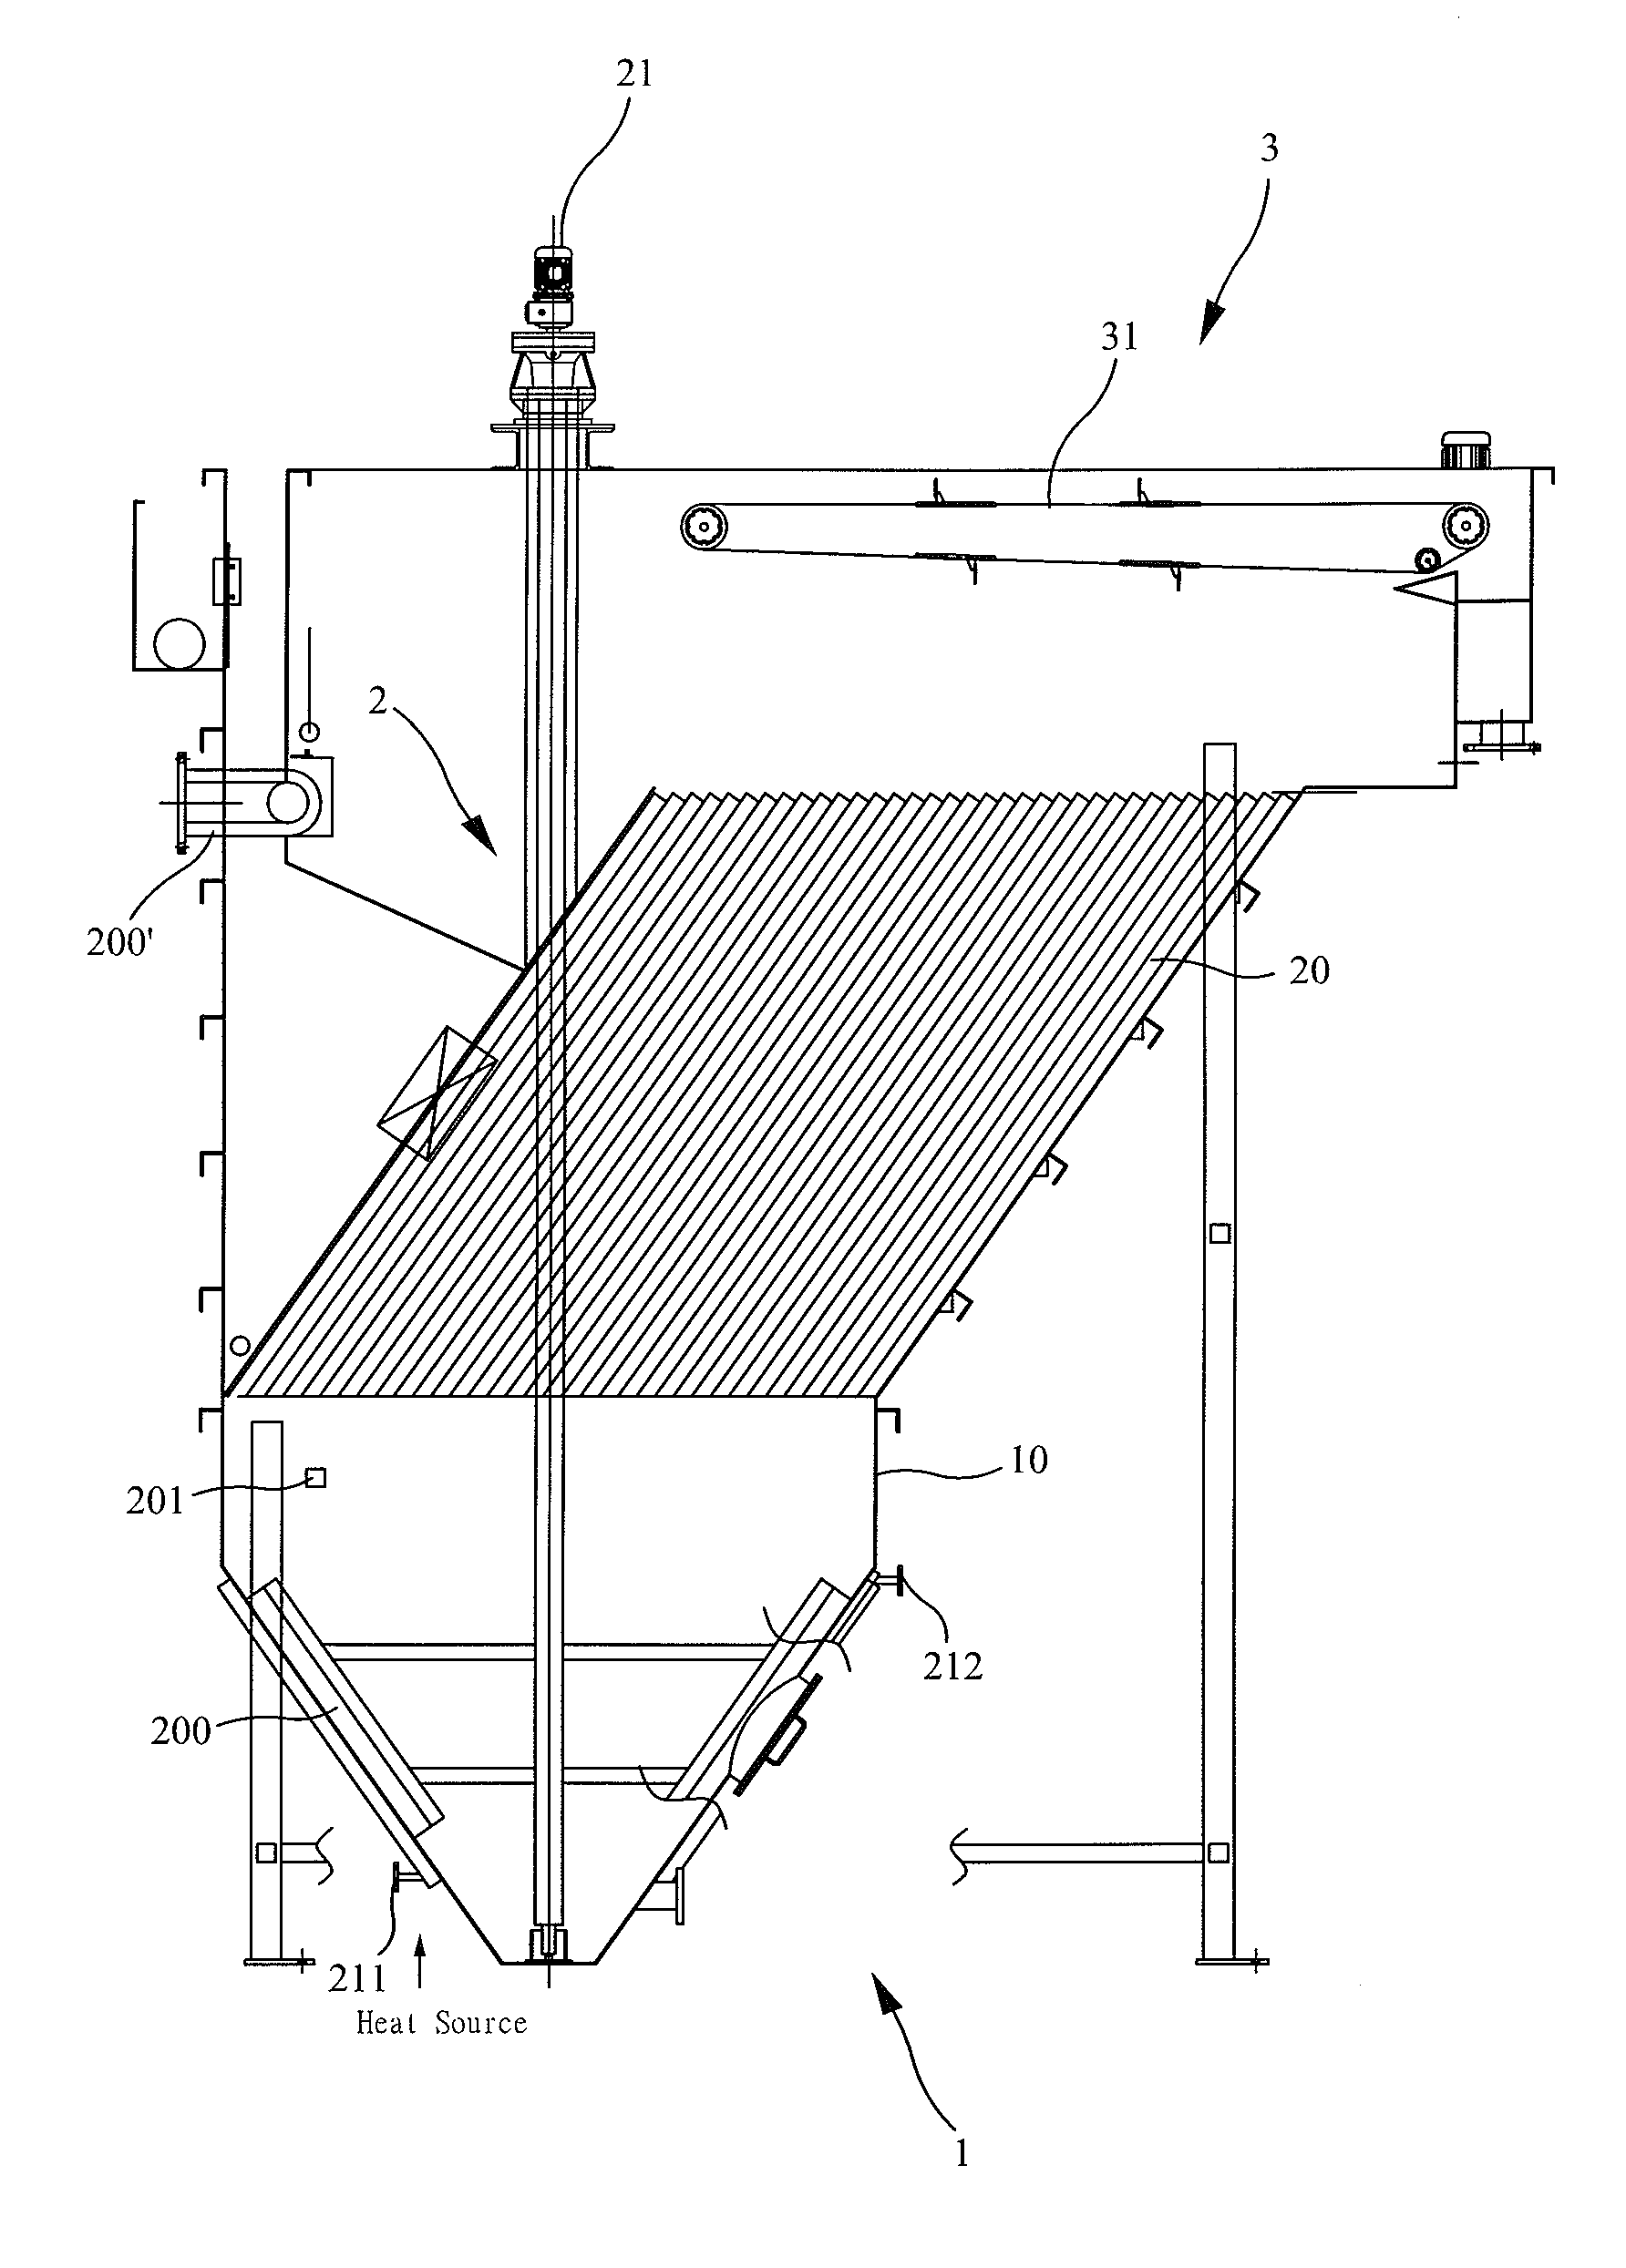 Sedimentation and Floatation Wastewater Treatment Device with a Heater